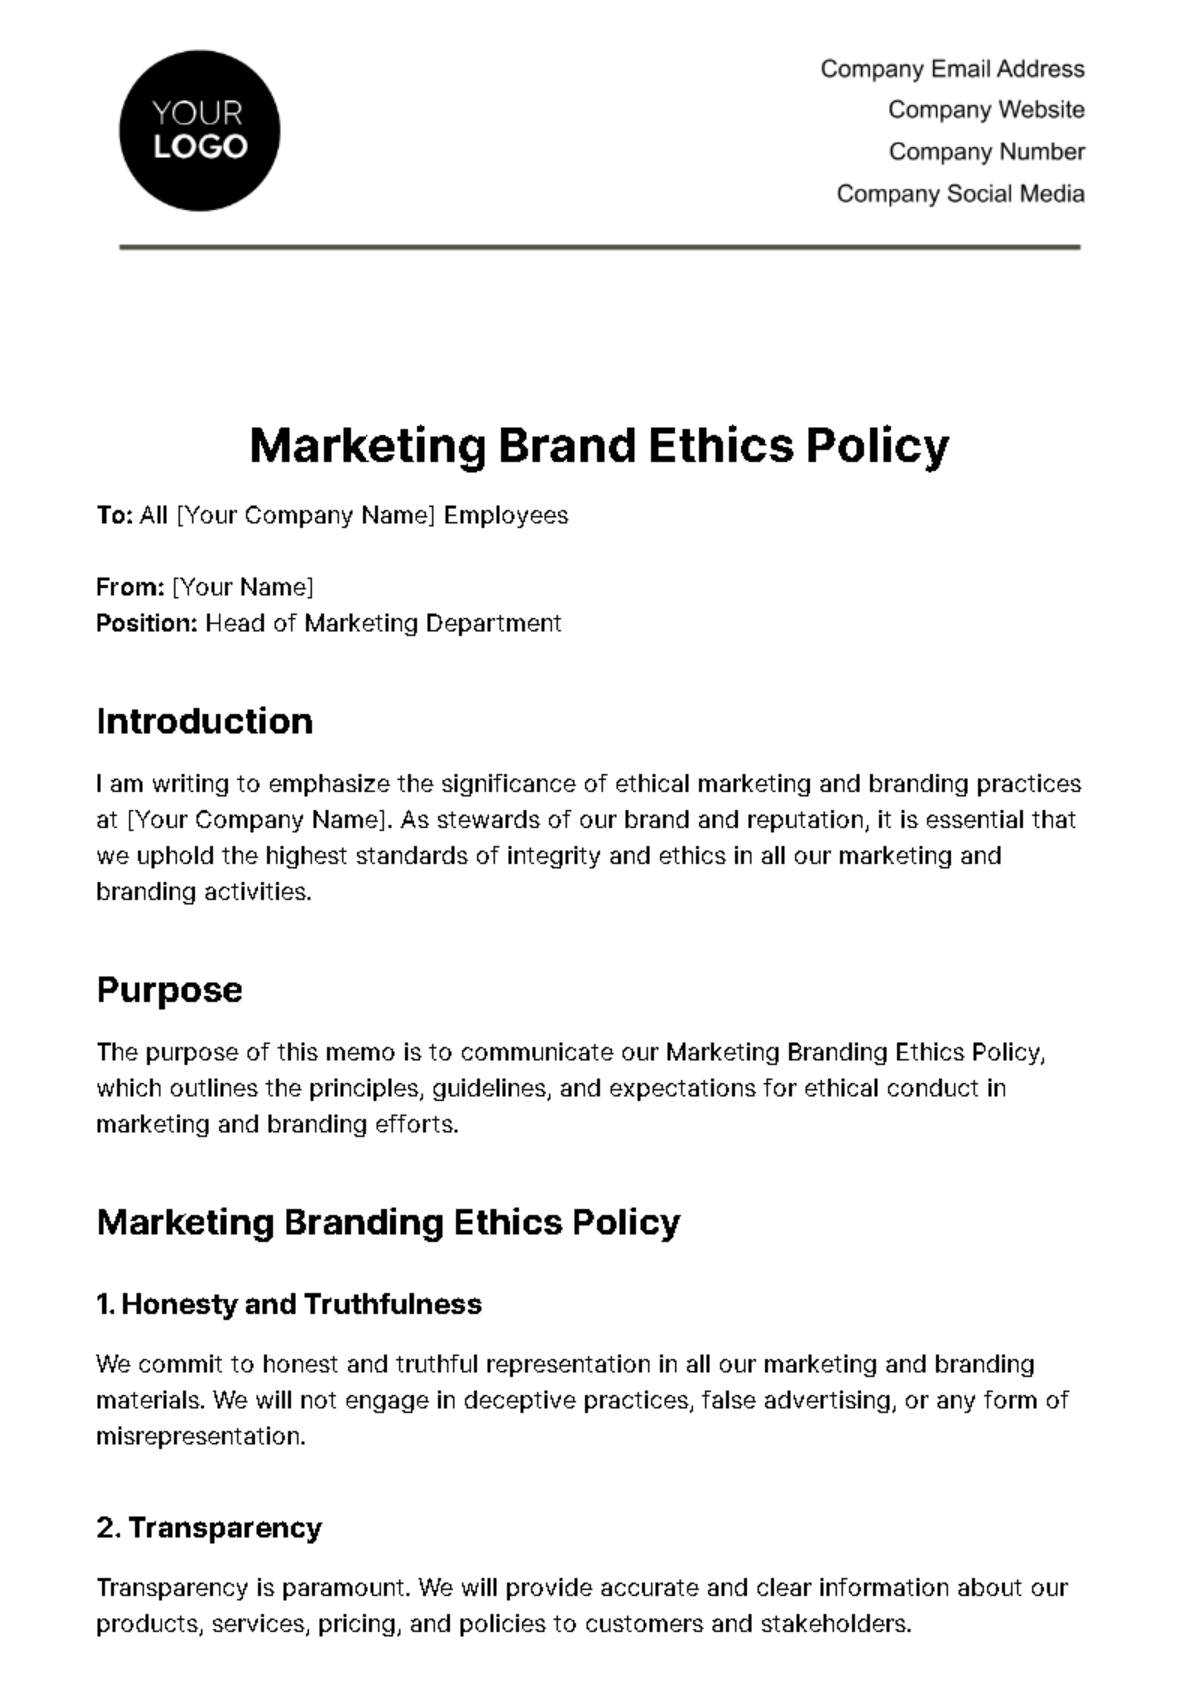 Free Marketing Branding Ethics Policy Template